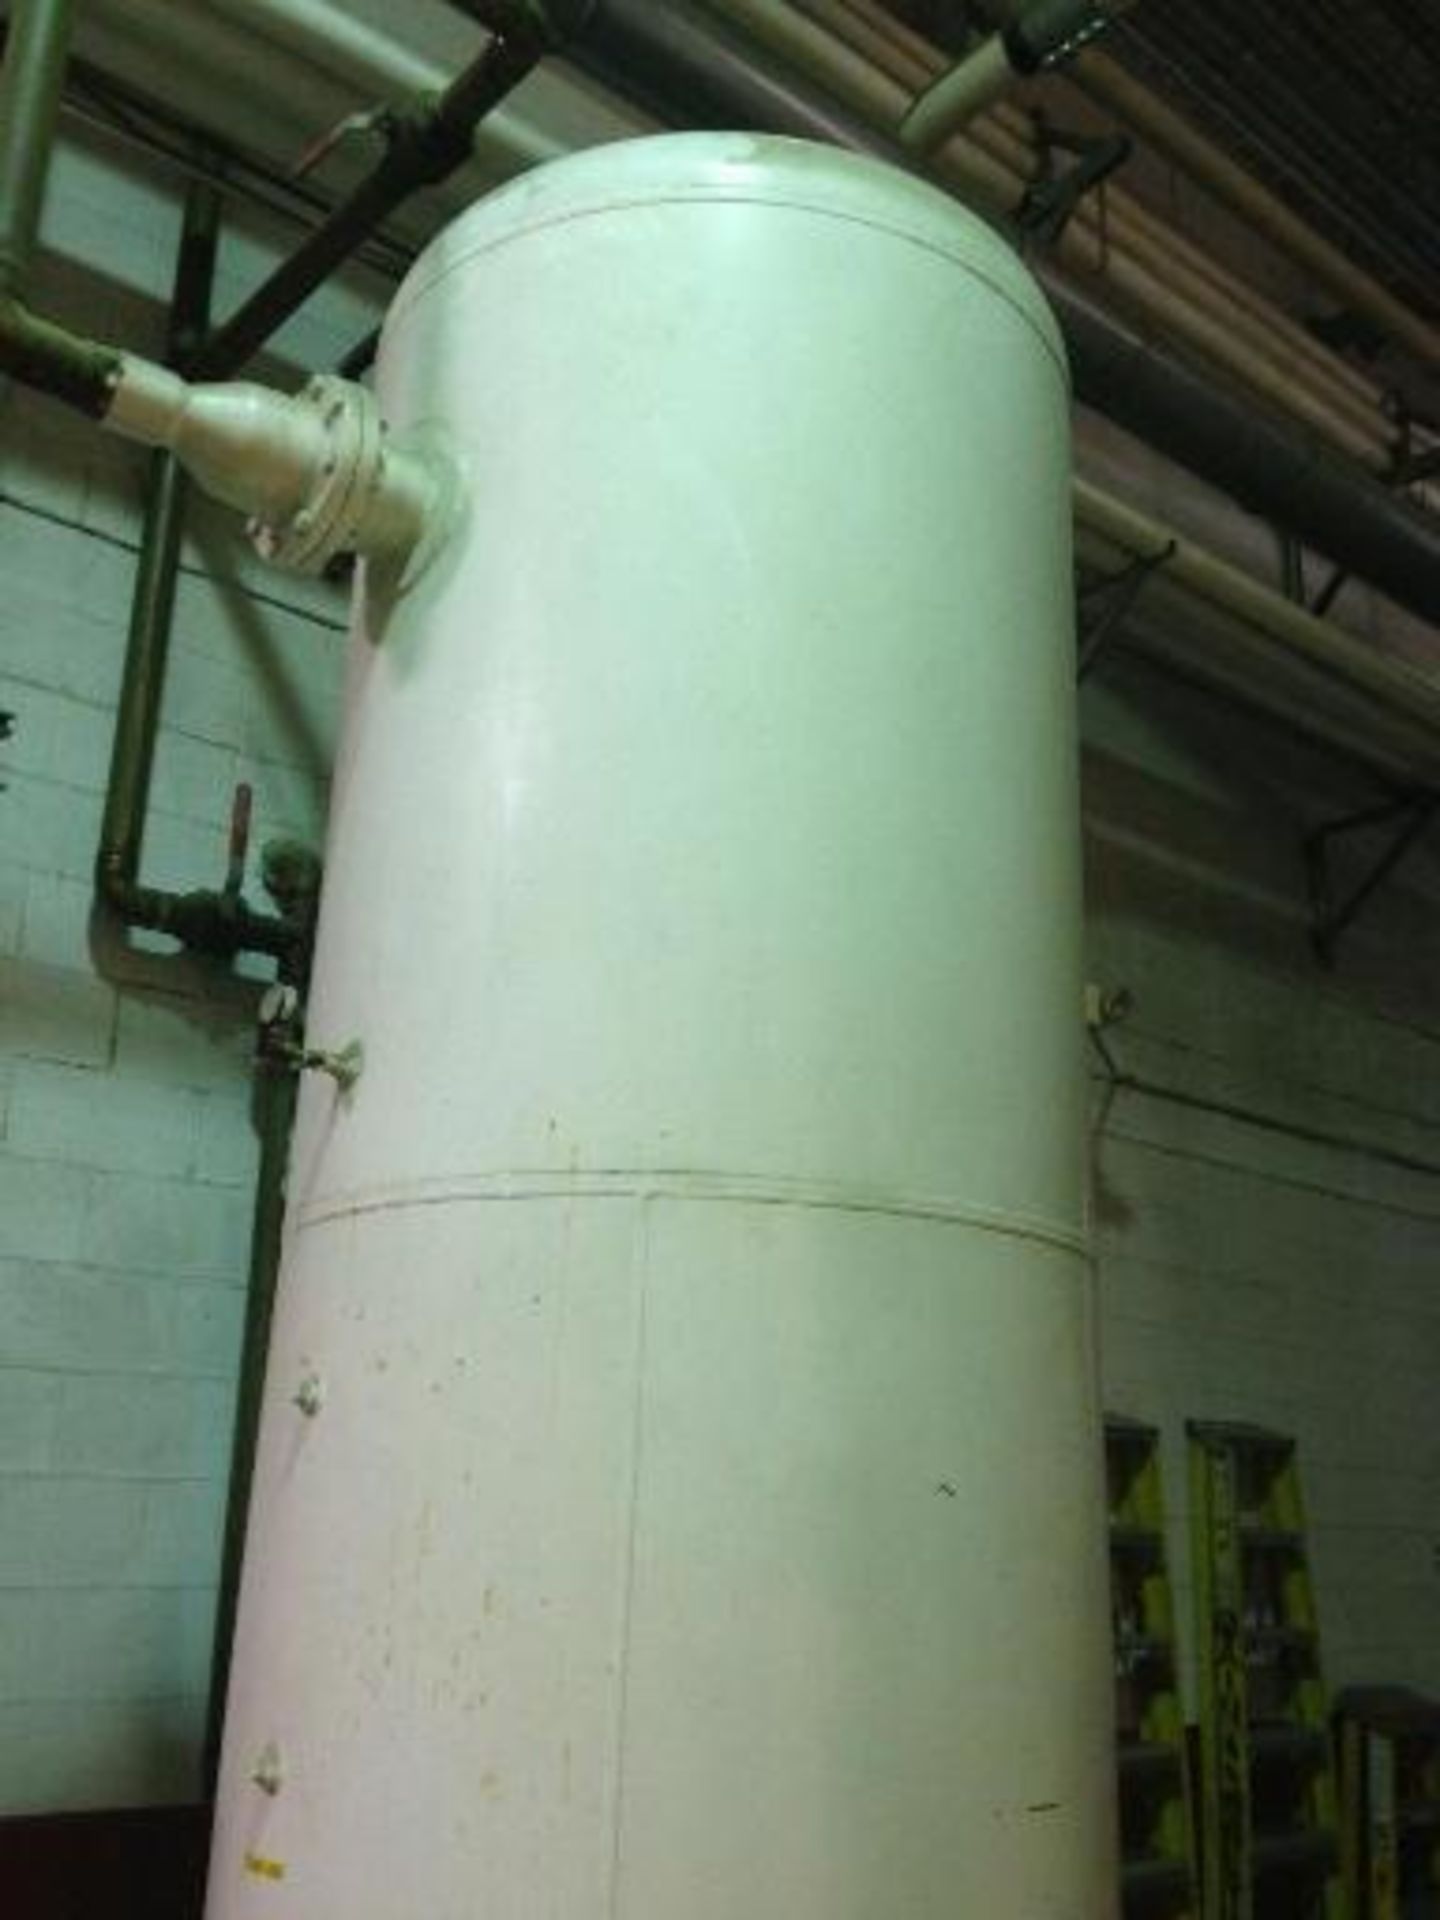 Vertical air receiver, mild steel. Located in Marion, Ohio Rigging Fee: $350 - Image 2 of 3